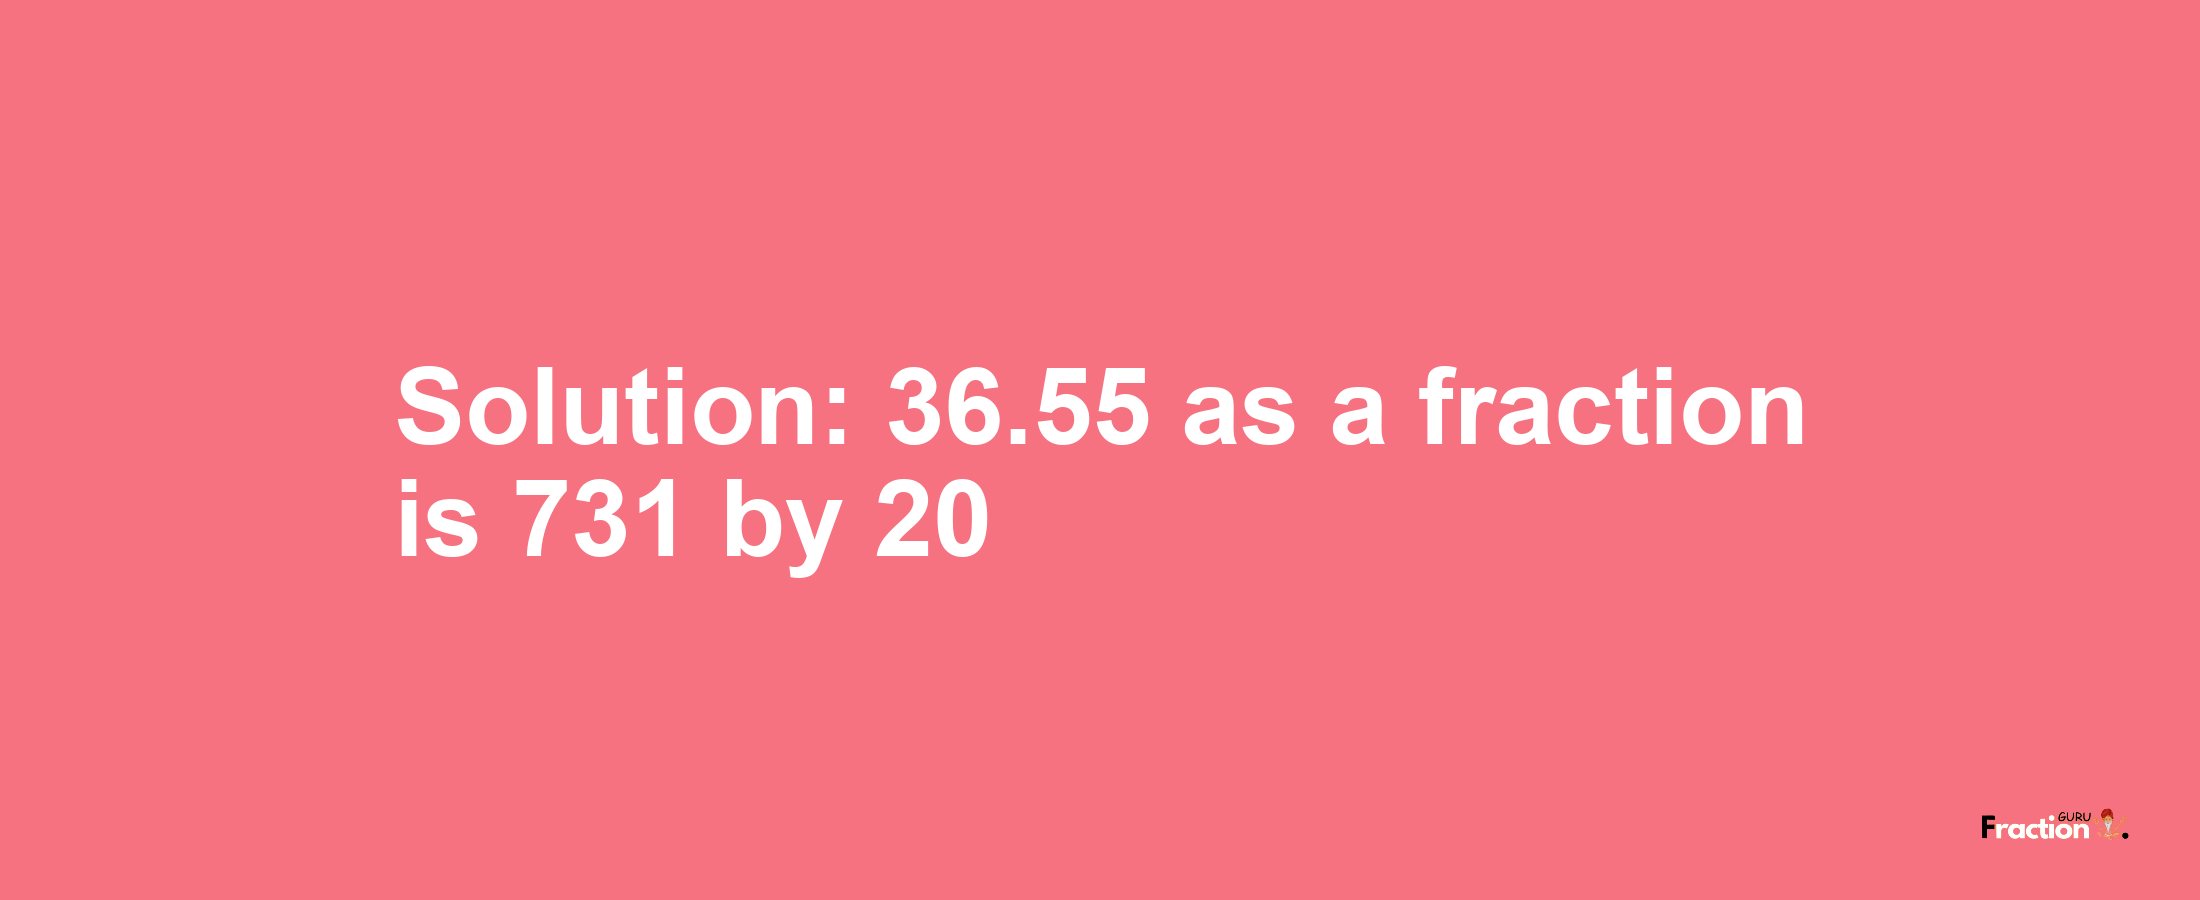 Solution:36.55 as a fraction is 731/20